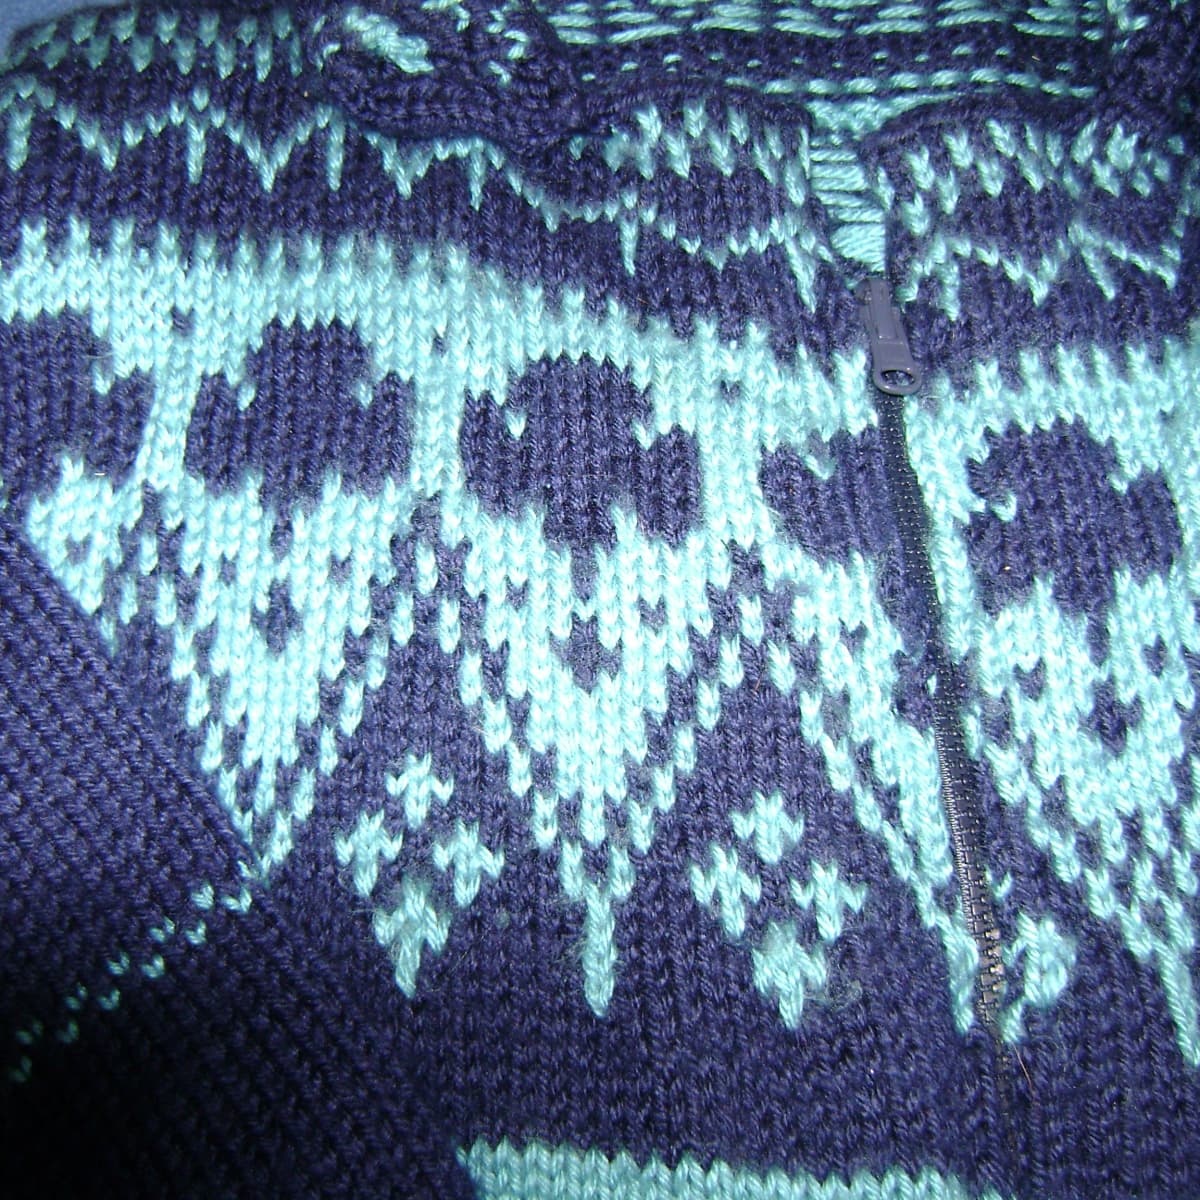 How to Knit With Color Patterns: Step by Step to a Fair Isle